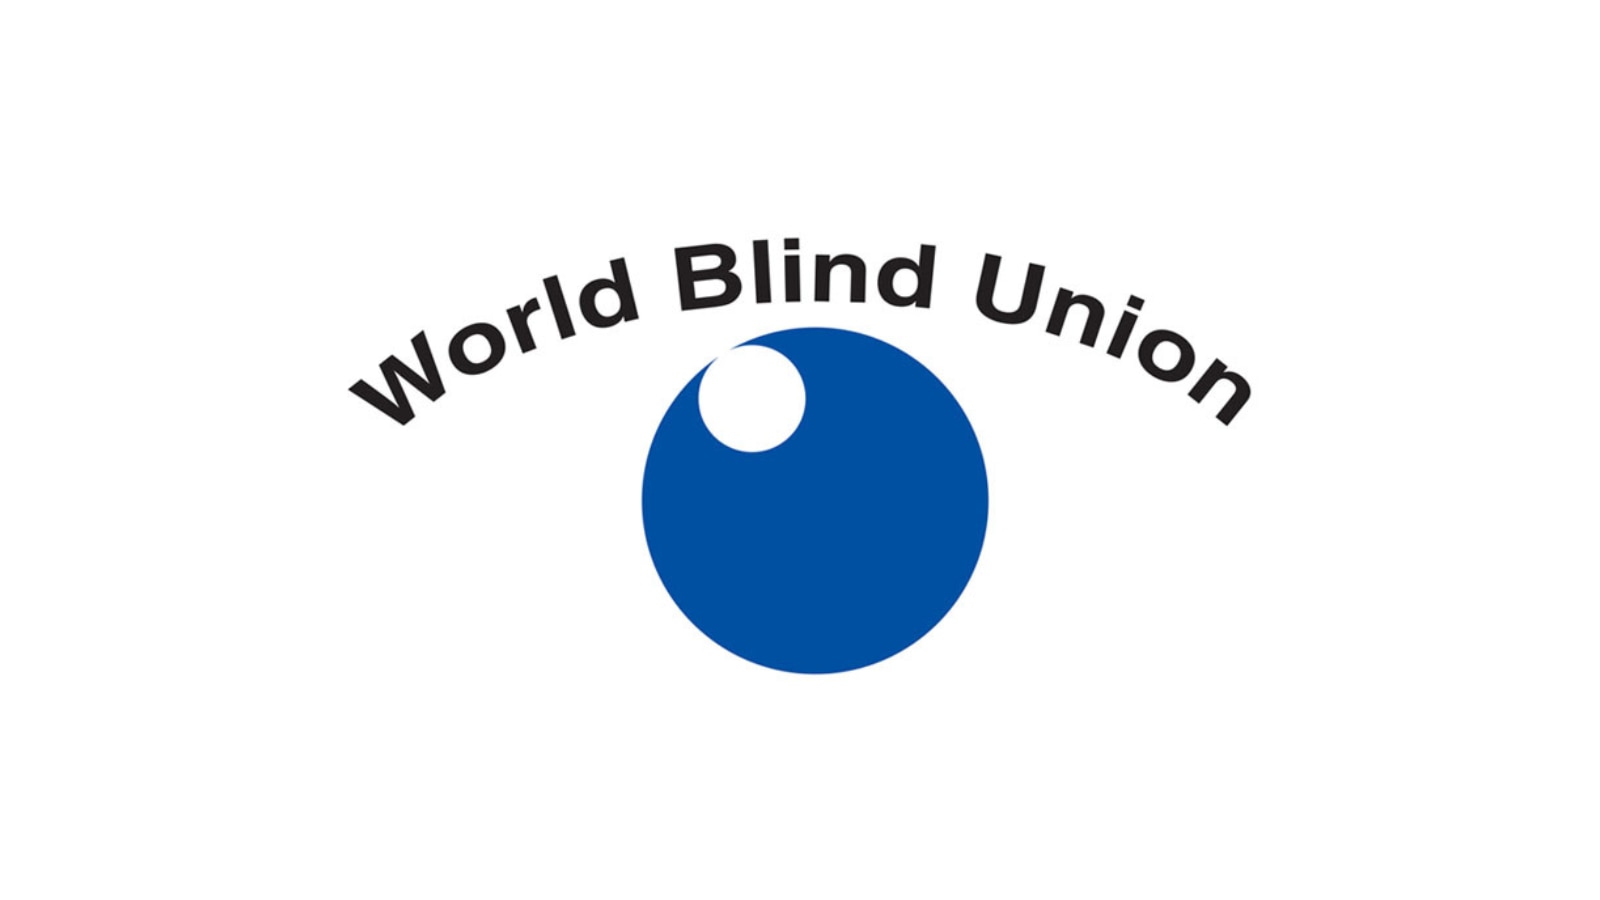 World Blind Union logo with the text: World Blind Union